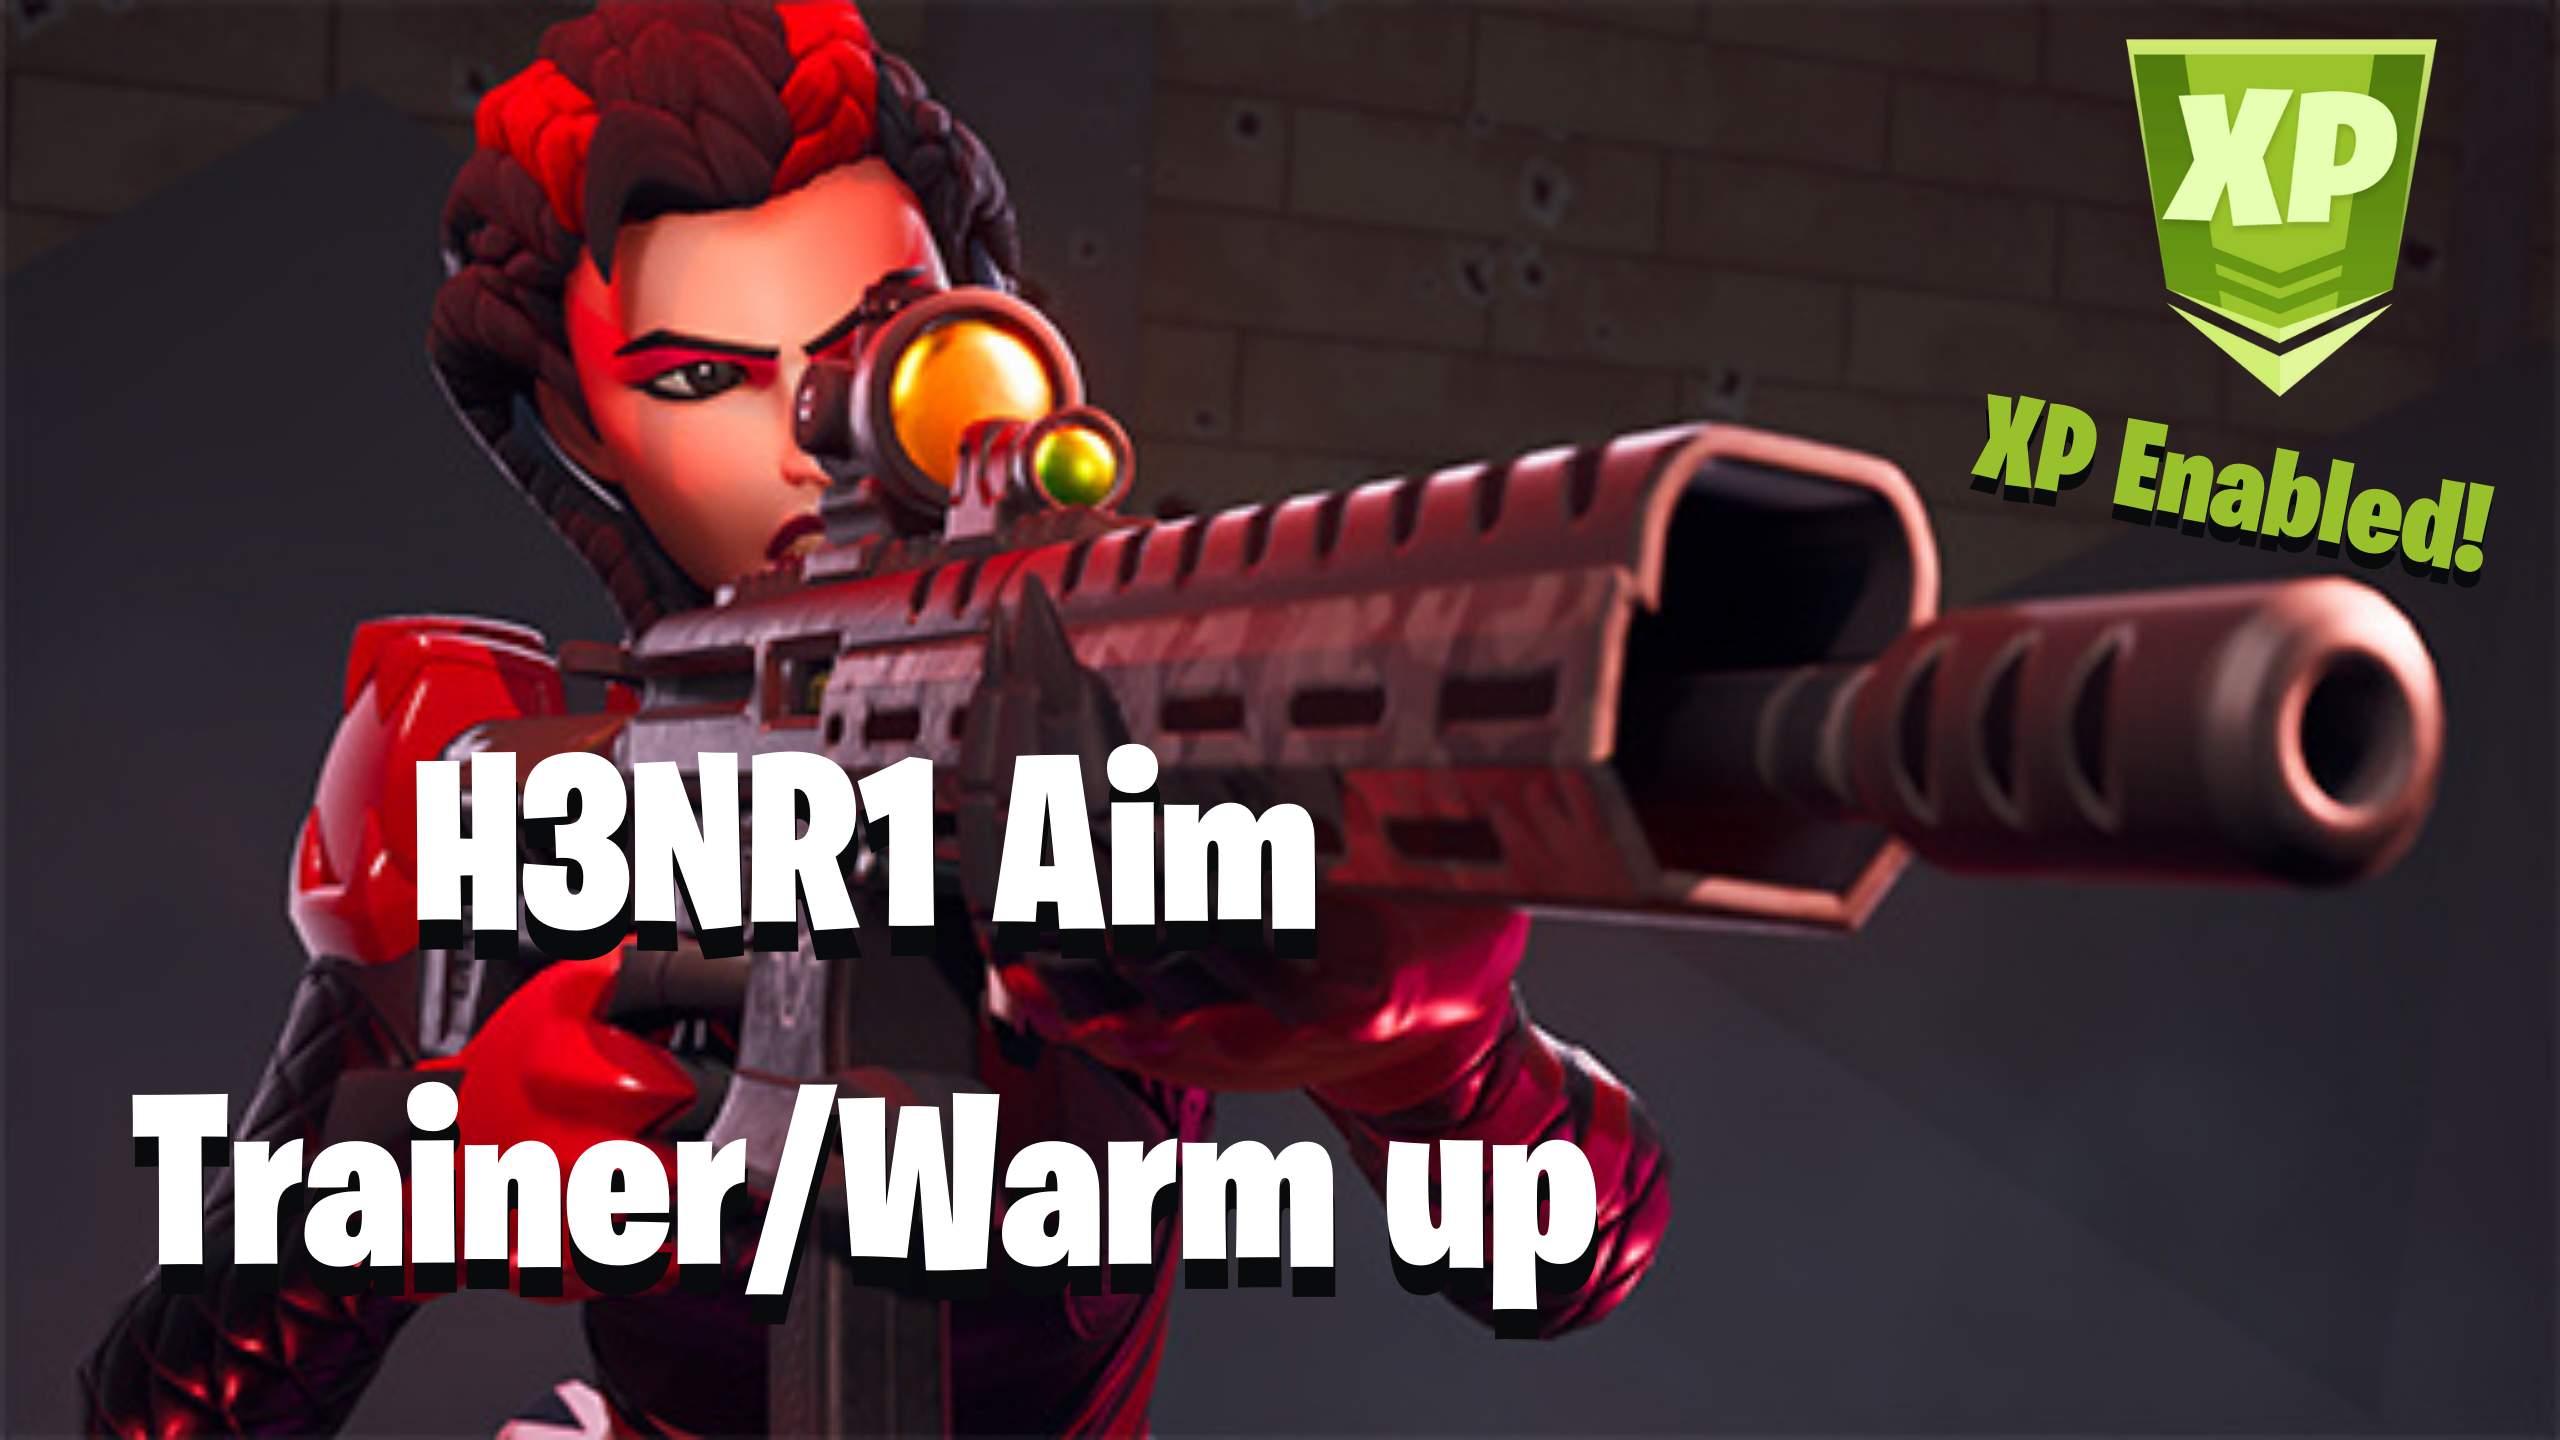 H3NR1 AIM TRAINER/WARM UP (XP ENABLED)